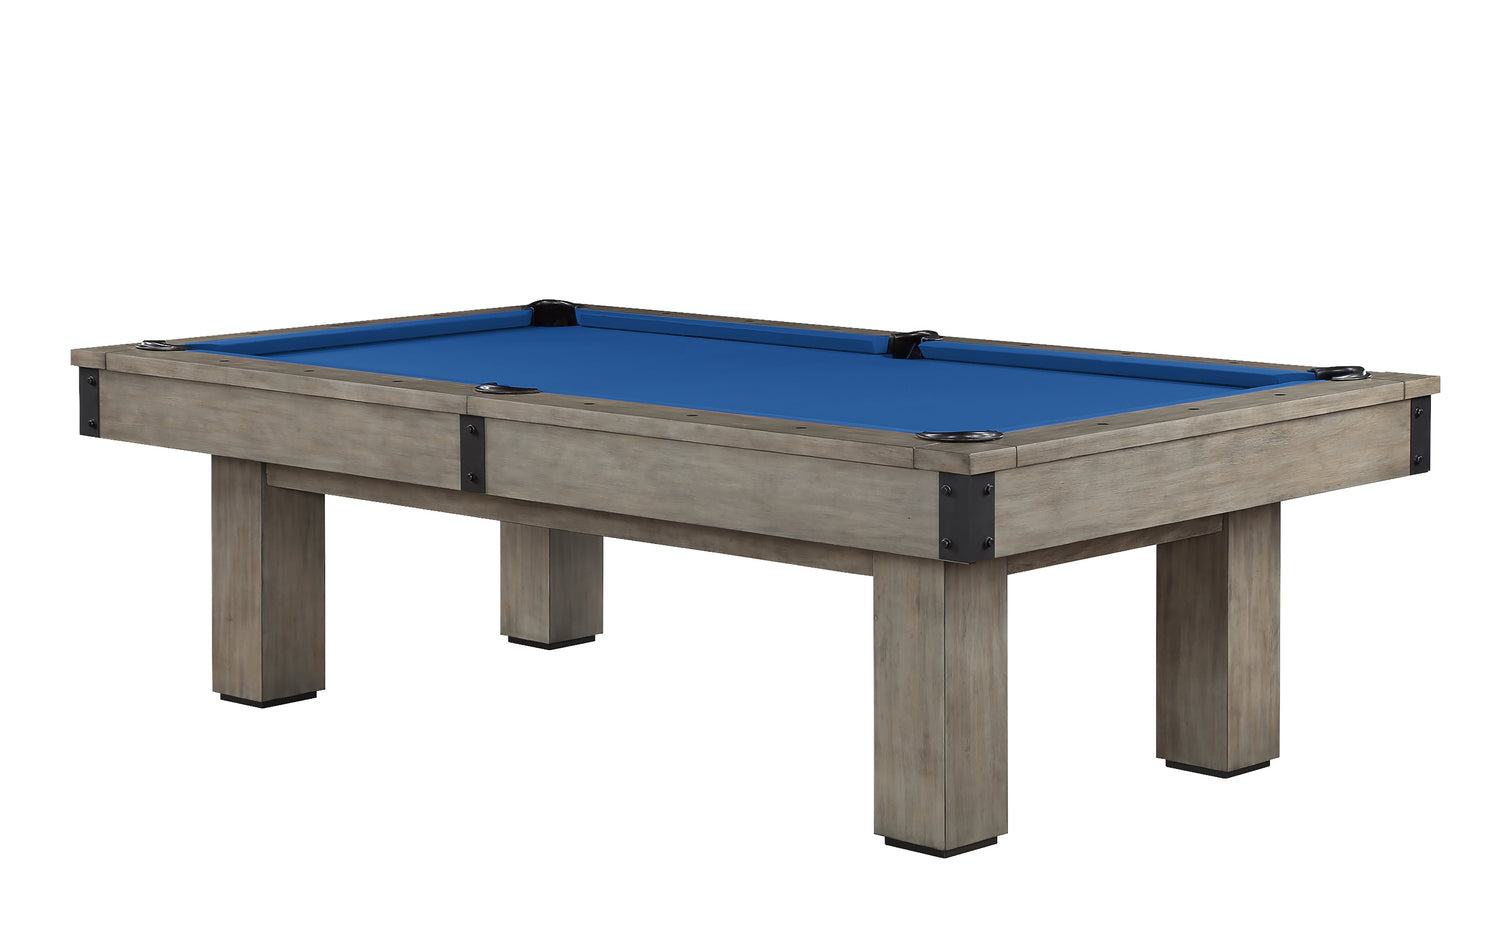 Legacy Billiards Colt II Pool Table in Overcast Finish with Euro Blue Cloth - Primary Image